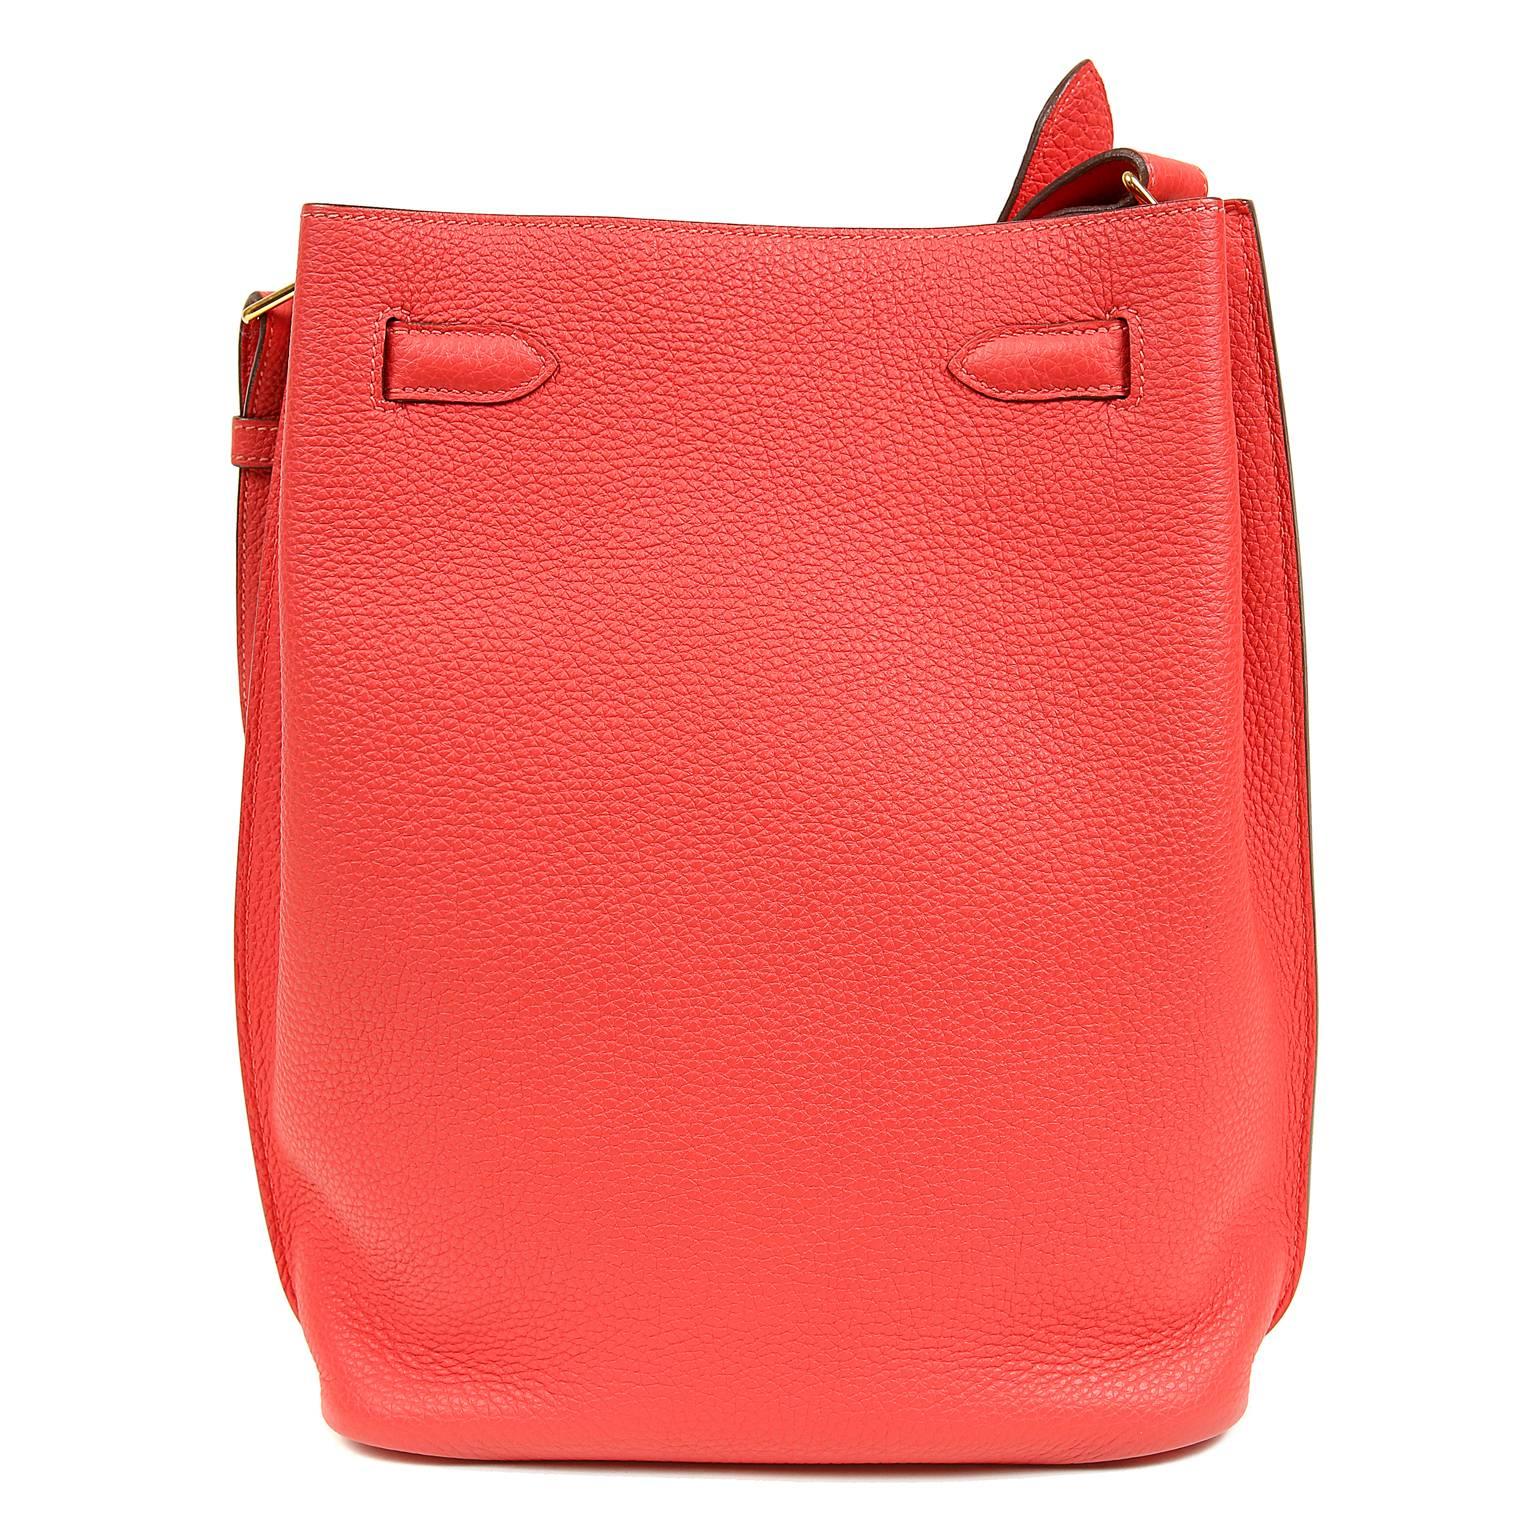 Hermès Geranium 26 cm So Kelly Bag- PRISTINE
Never carried, the protective plastic is intact on the hardware.   Introduced in 2008, the So Kelly is a relaxed shoulder carried version of the traditional Kelly. 

Vivid Geranium Togo calf leather is